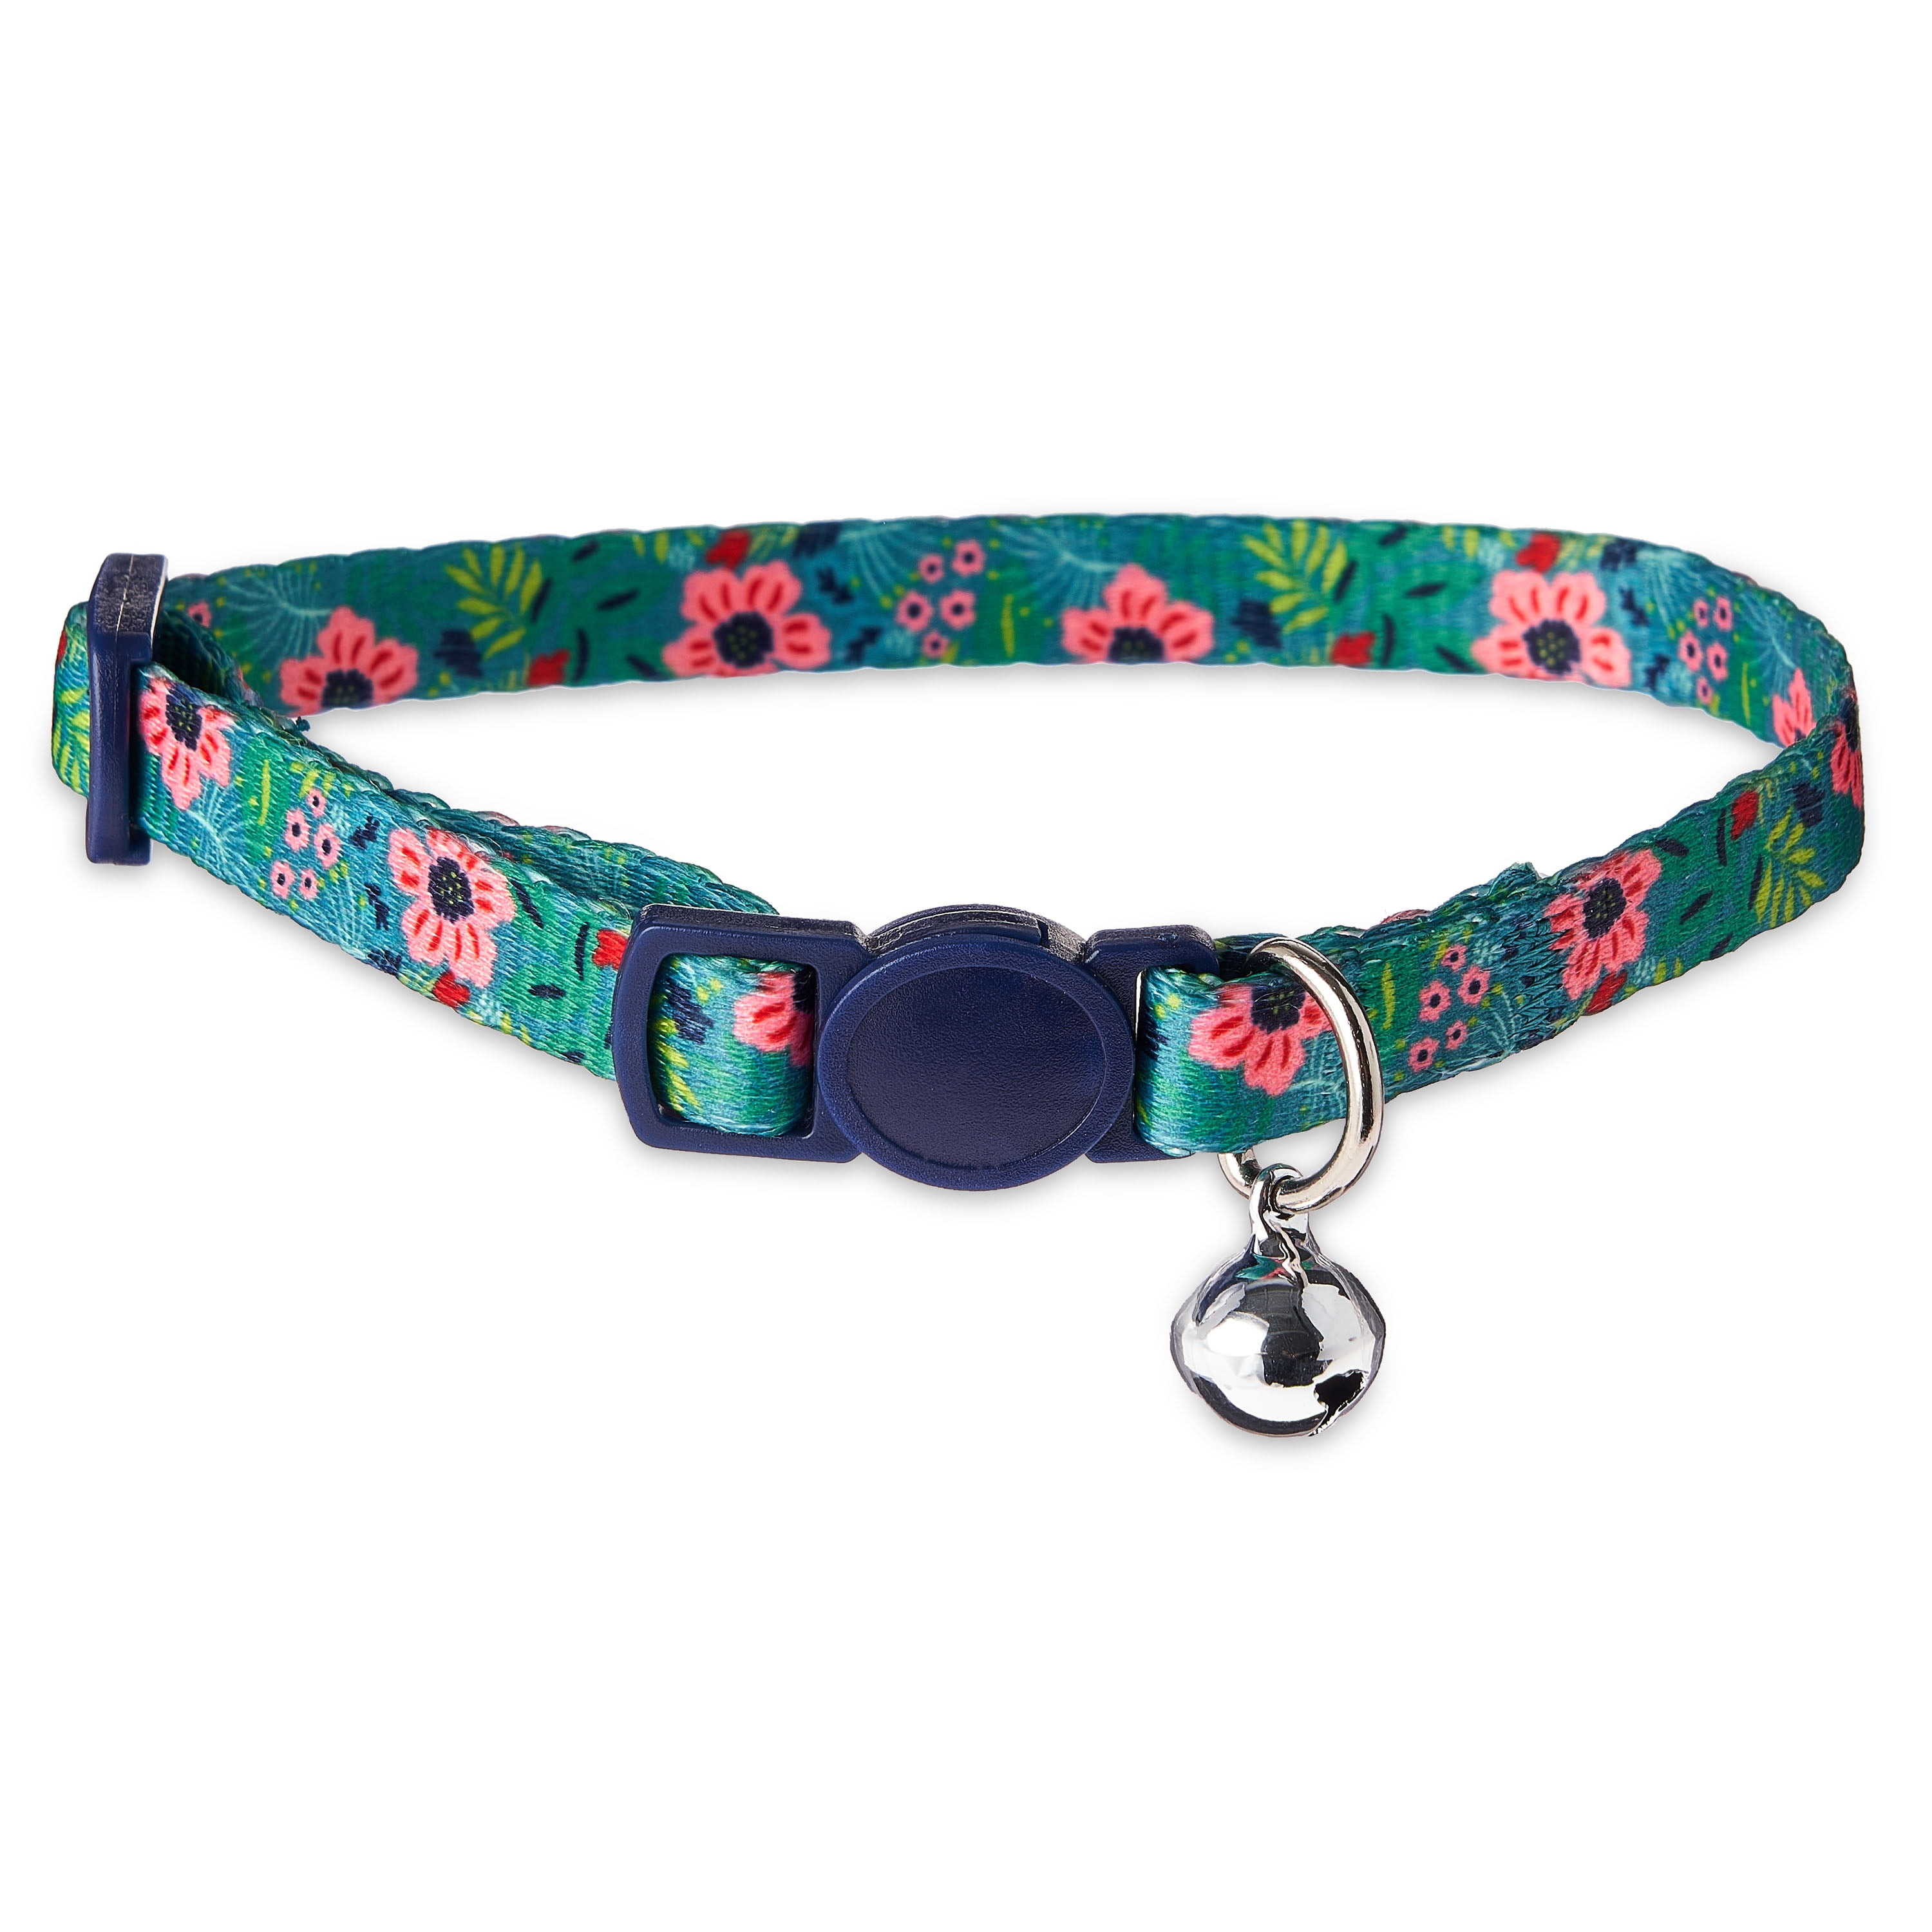 Shapes CAT Collars!!!! Circles Patterns Flowers Stripes Various Colors 